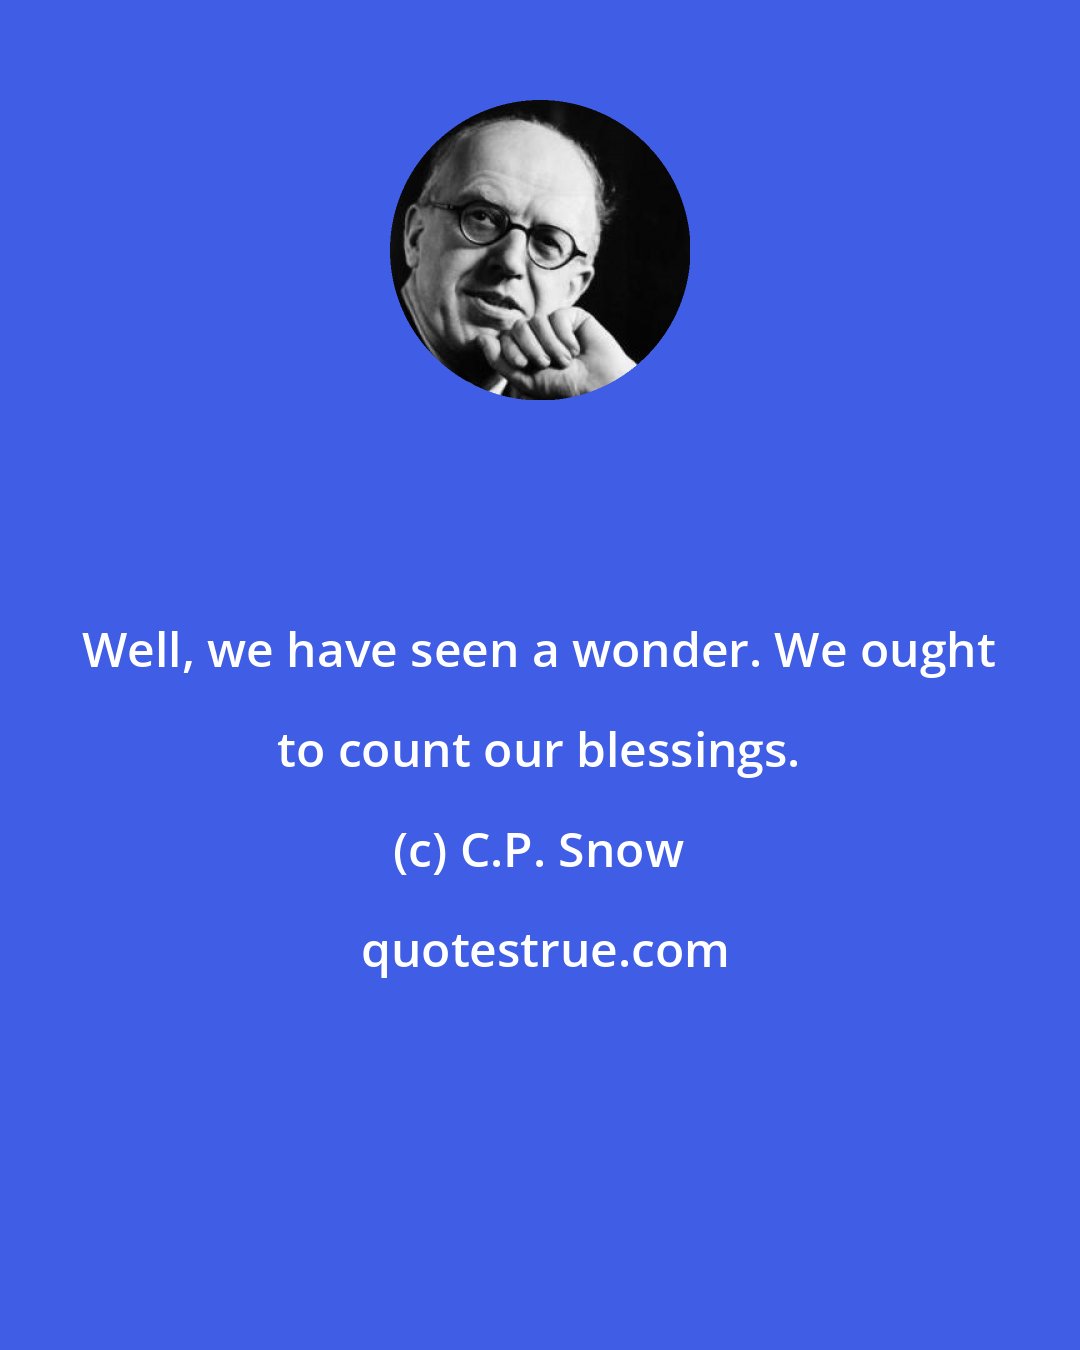 C.P. Snow: Well, we have seen a wonder. We ought to count our blessings.